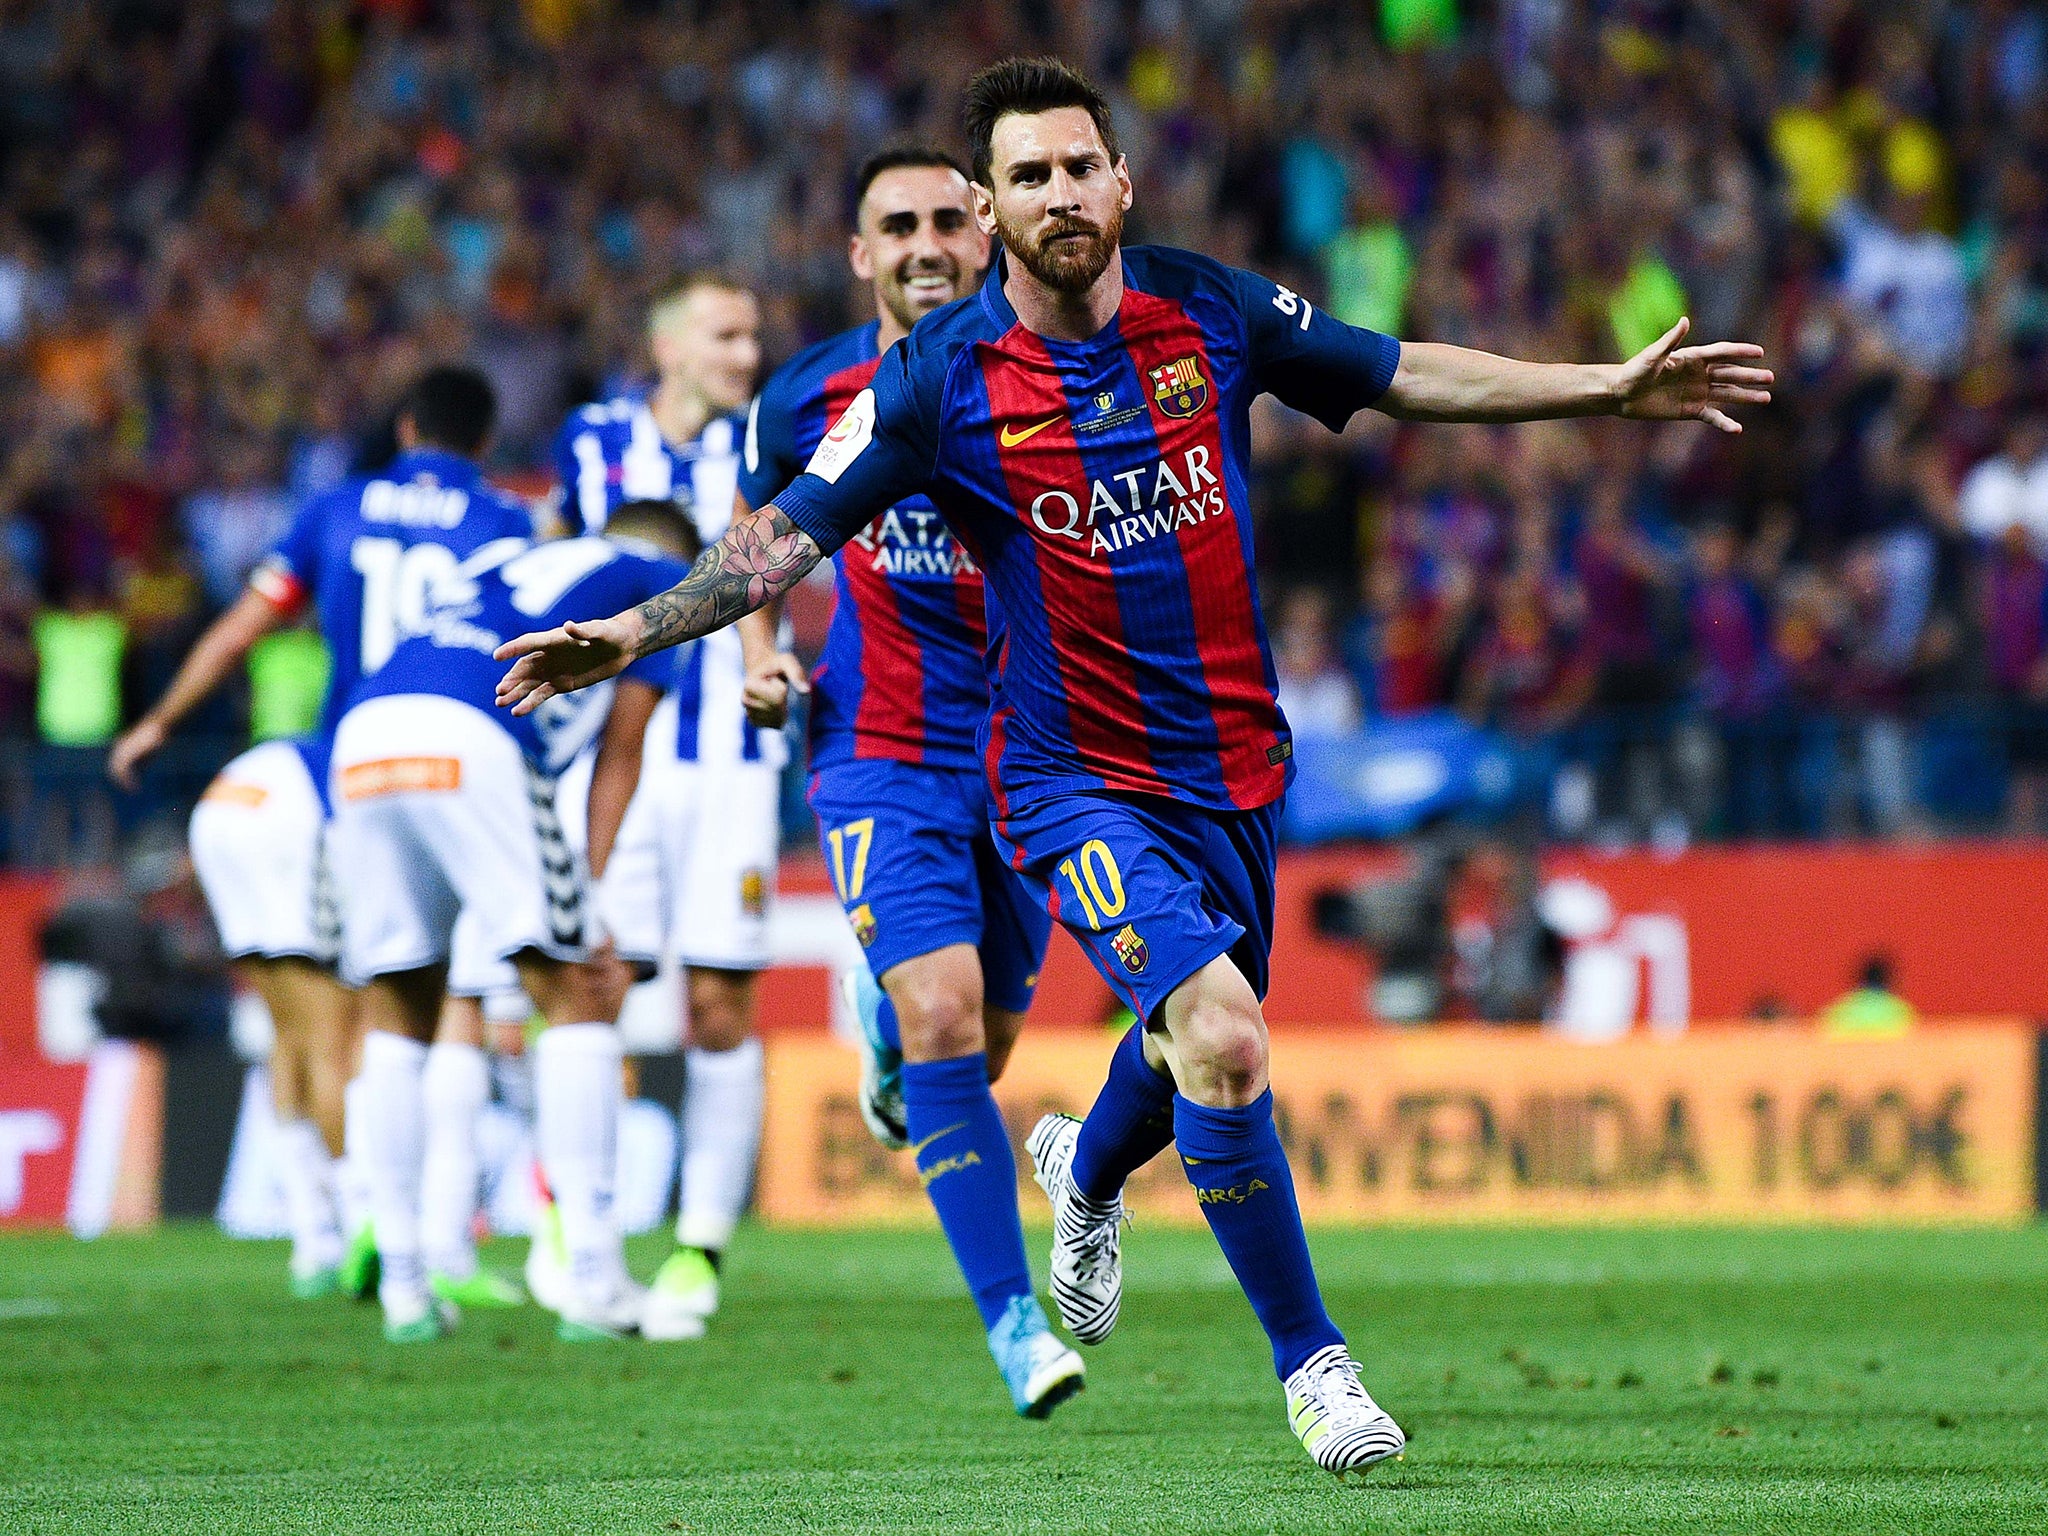 Messi will commit his future to Barca, but it could be his final contract in Spain